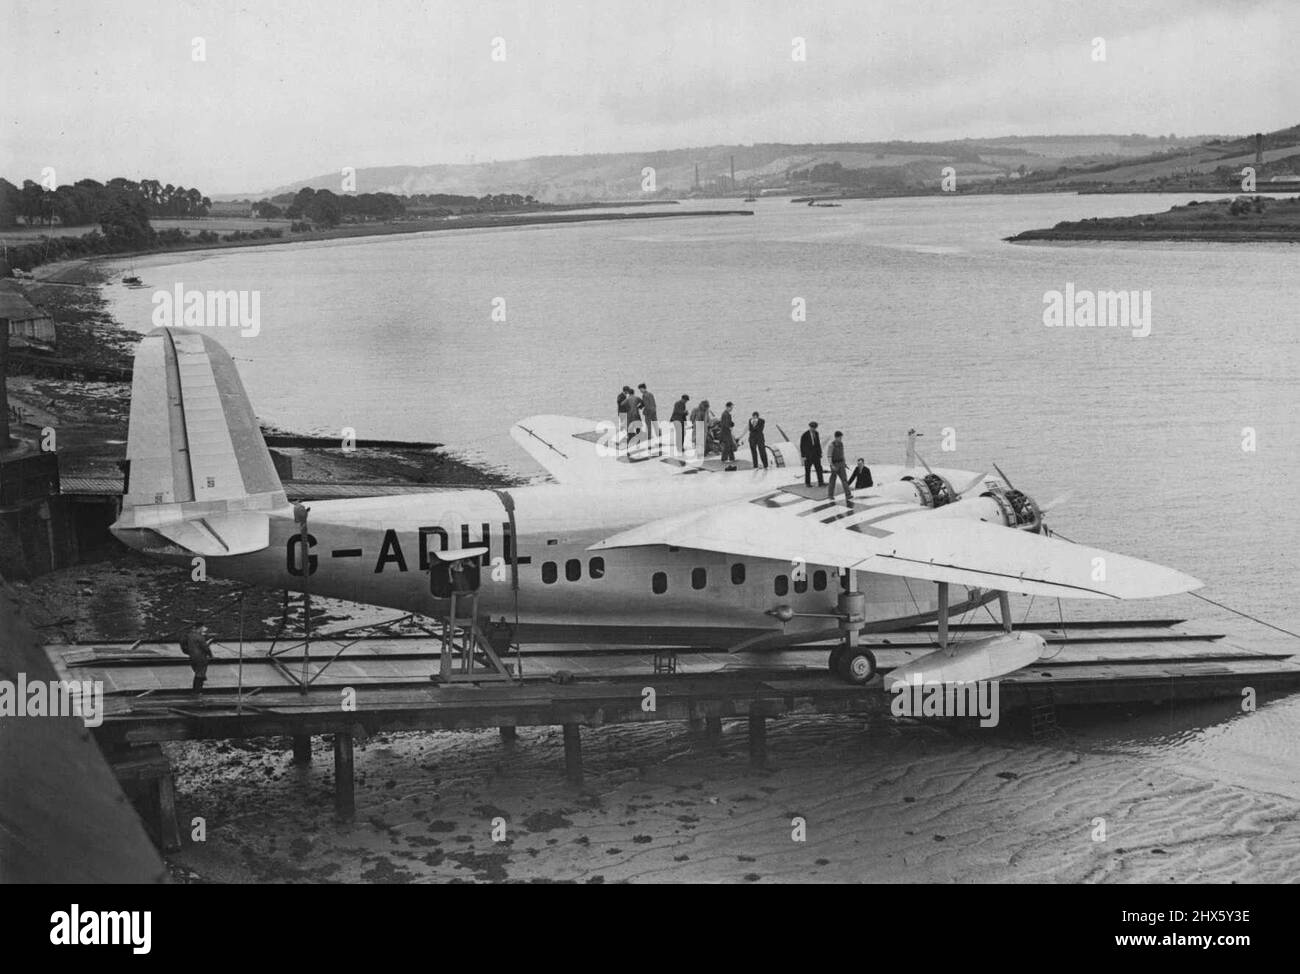 First Of Empire Flying Boat Fleet -- The first of the large fleet of flying boats for Imperial Airways Empire services, built by Messrs short Brothers, photographed at Rochester, Kent, to-day, July 2. July 27, 1936.;First Of Empire Flying Boat Fleet -- The first of the large fleet of flying boats for Imperial Airways Empire services, built by Messrs short Brothers, photographed at Rochester, Kent, to-day, July 2. Stock Photo